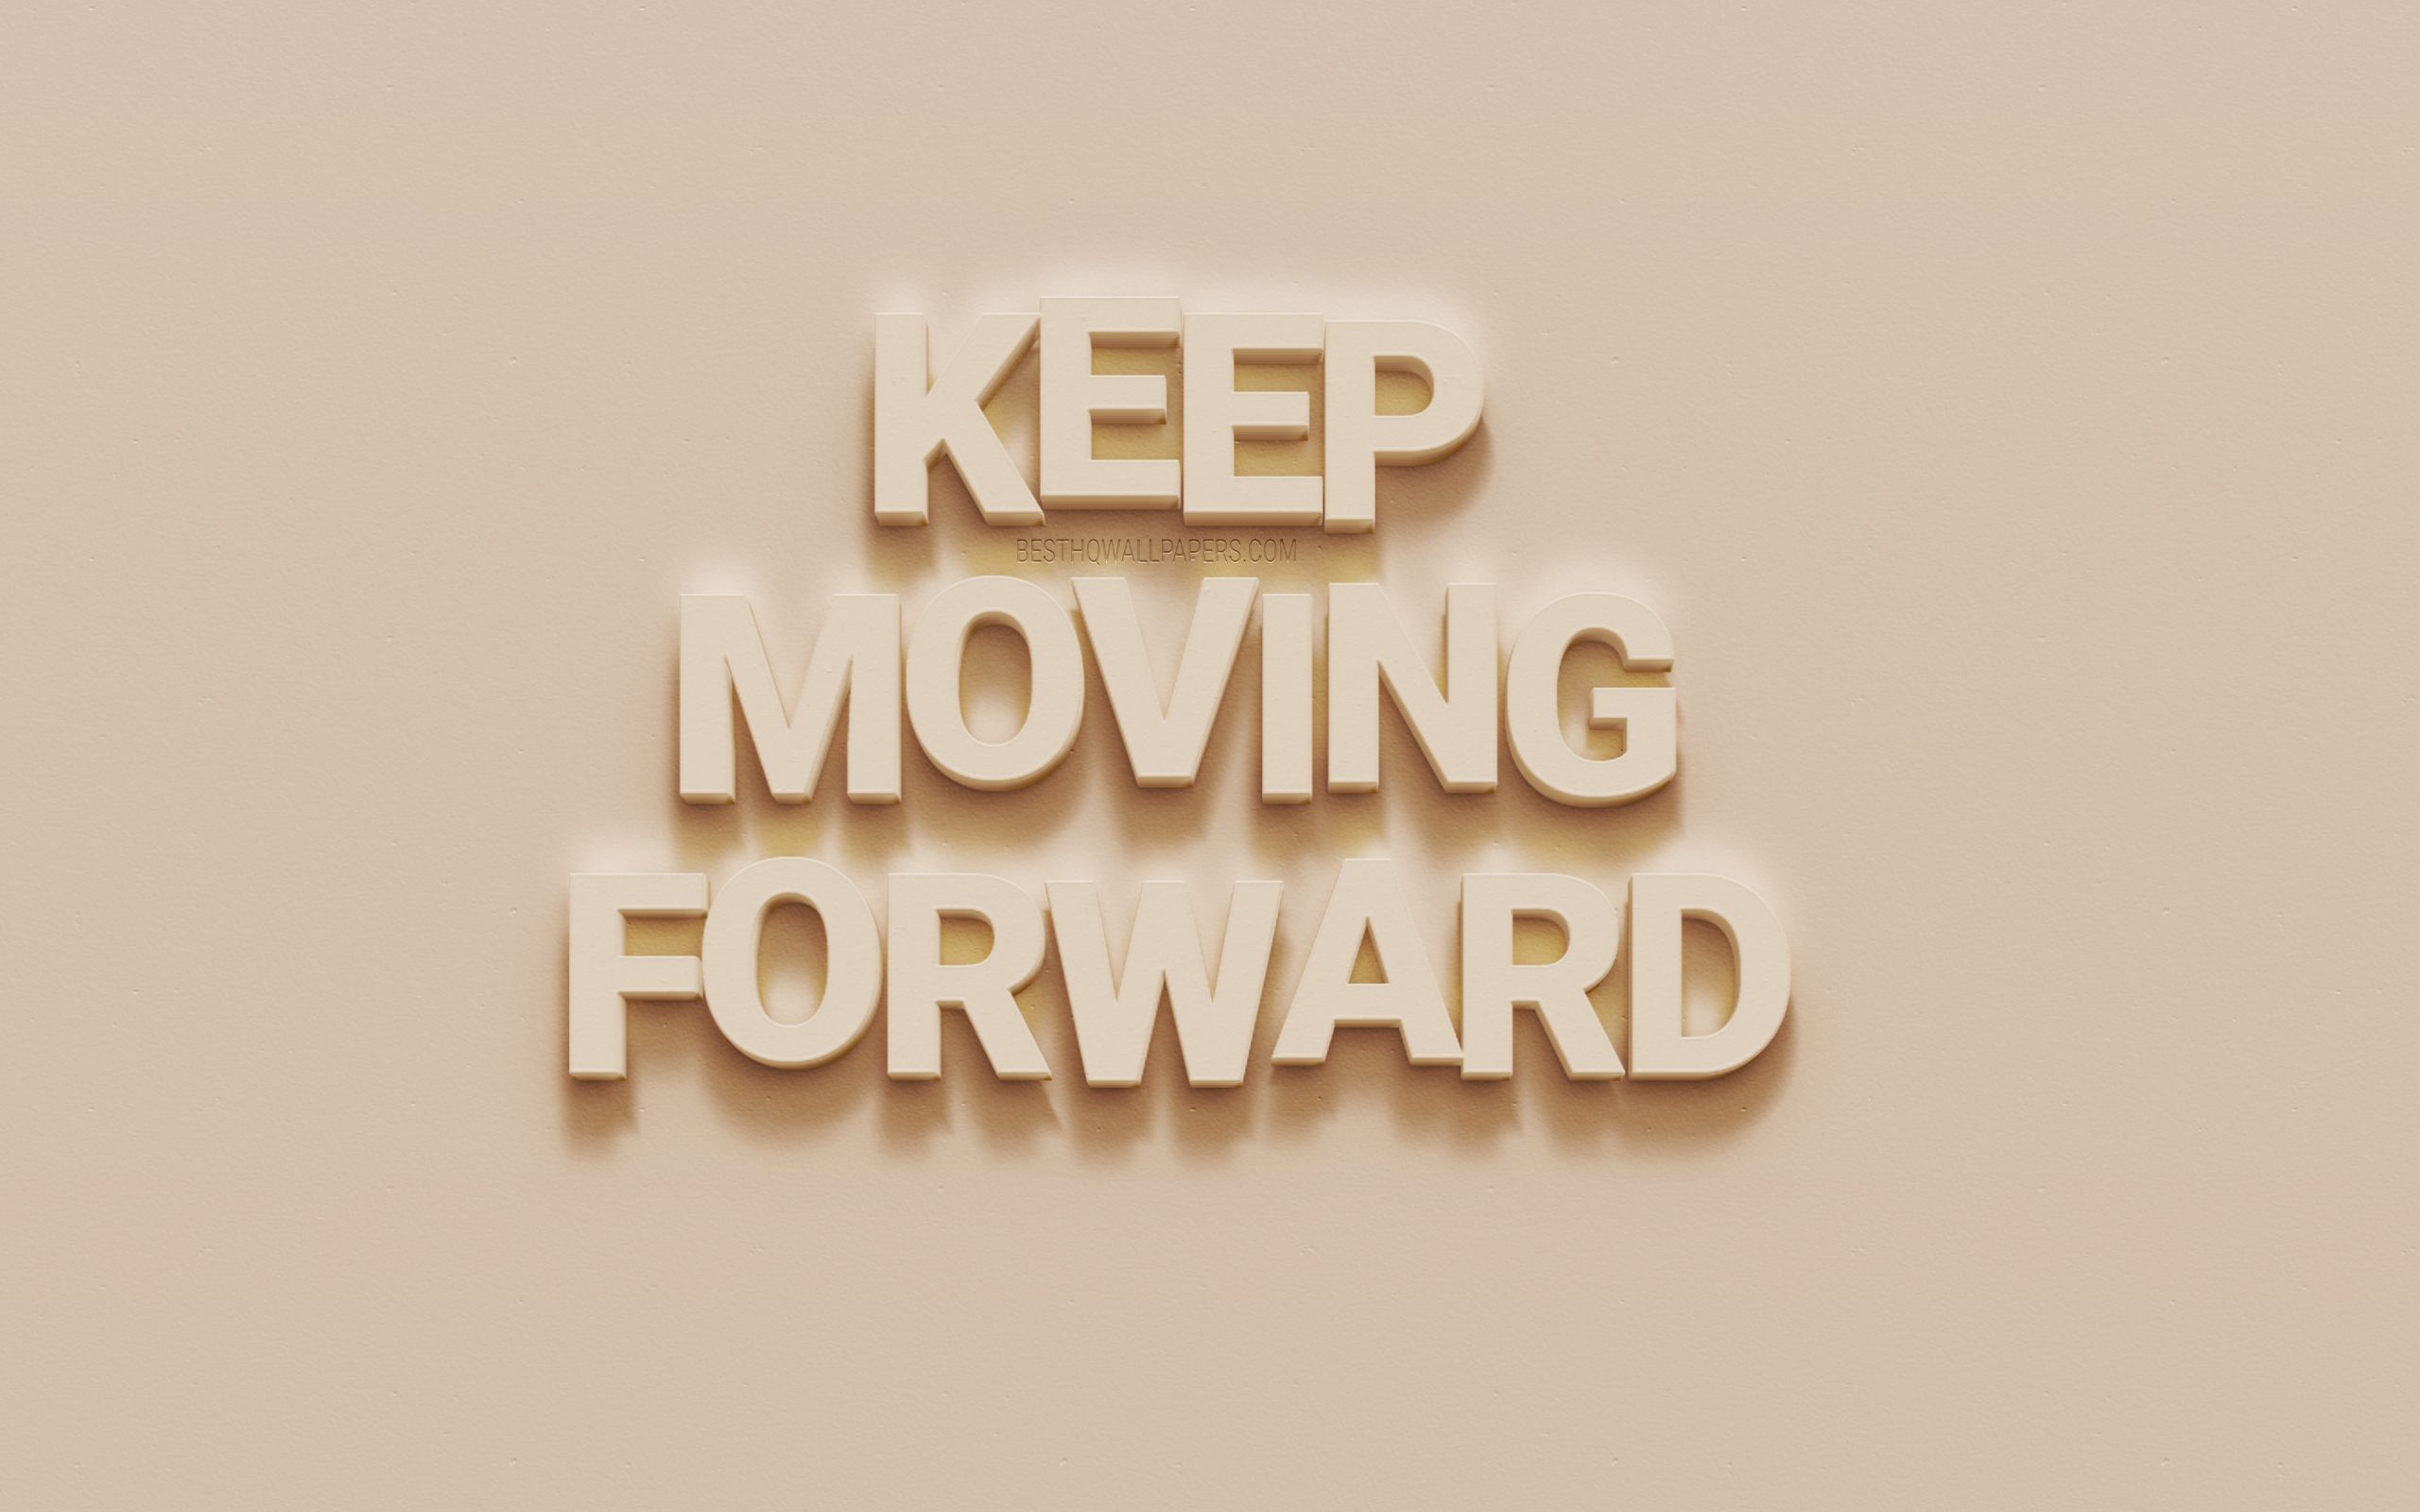 Download wallpaper Keep moving forward, motivation quotes, creative art, wall texture, inspiration for desktop with resolution 2560x1600. High Quality HD picture wallpaper